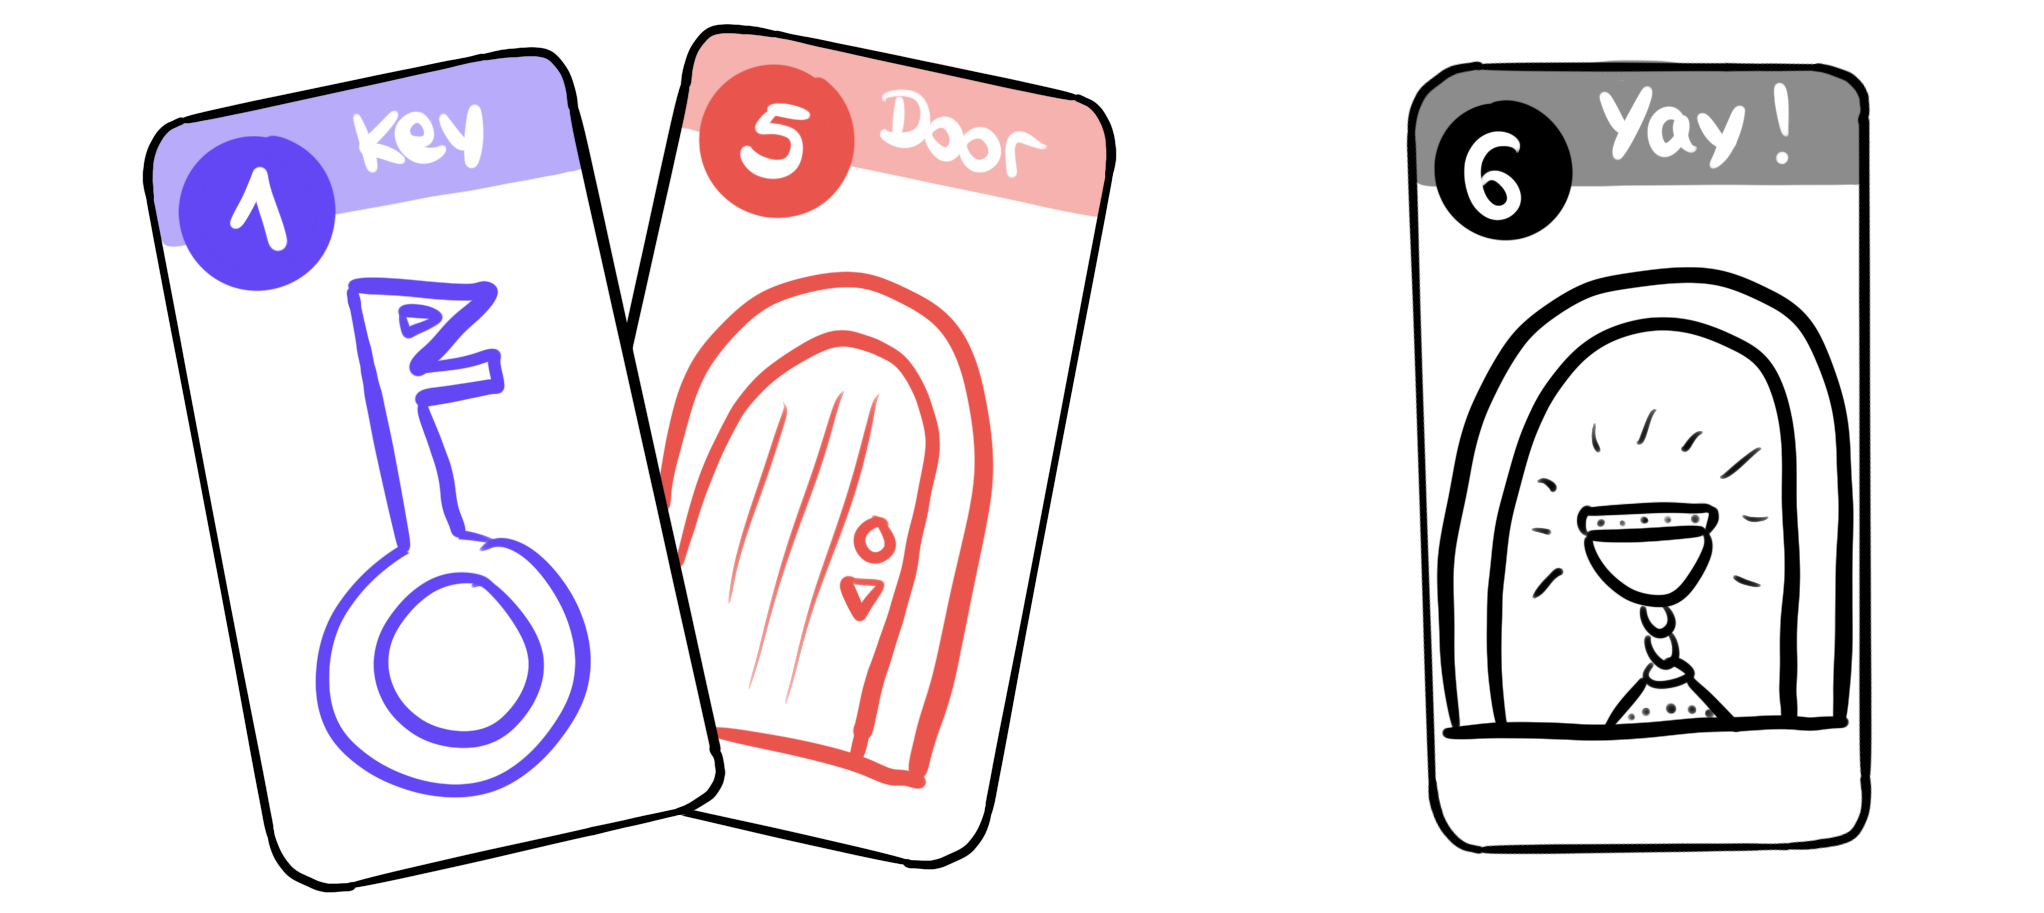 On the left, there are two cards. A card with a key, numbered one, and a card with a door, numbered 5. On the right, there is a card with an open door and a treasure, numbered 6.